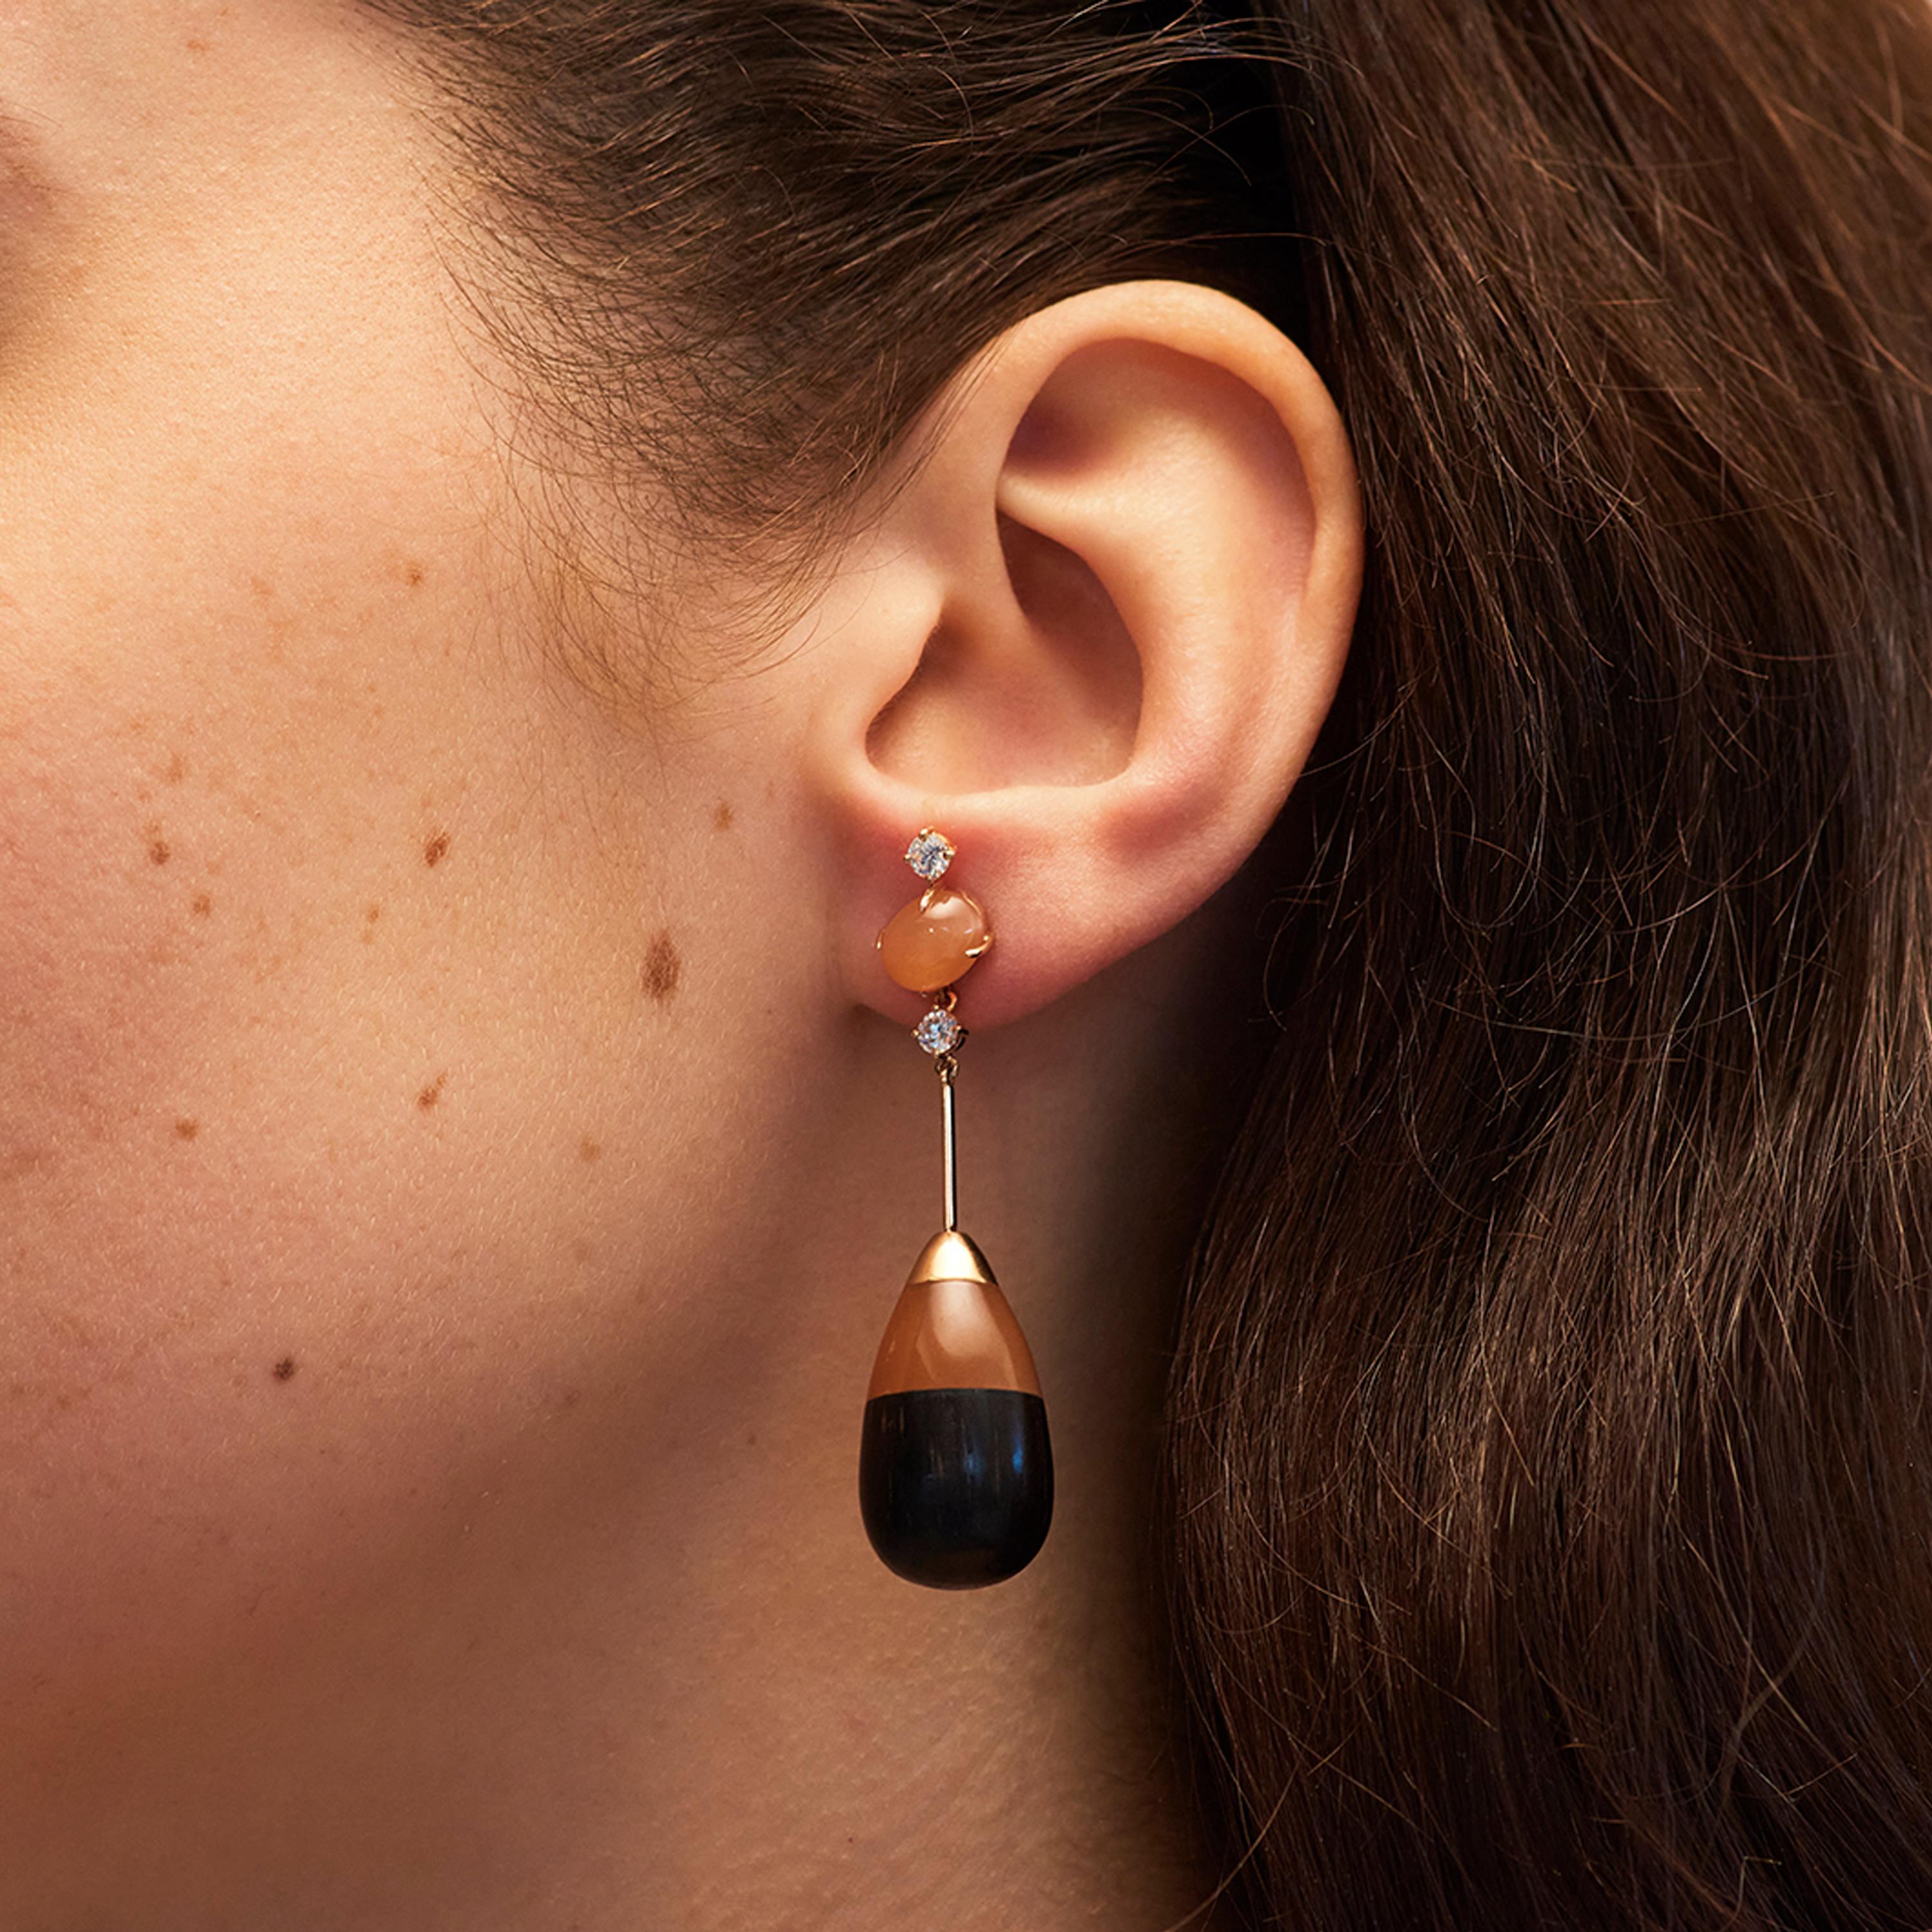 Francesca Villa’s Orange Drop Earrings are crafted from 18 karat rose gold, lacewood, adventurine (45.00ct) and orange sapphires (0.50ct). These earrings celebrate the magnificently talented stone carvers she works with, as well as the beauty found